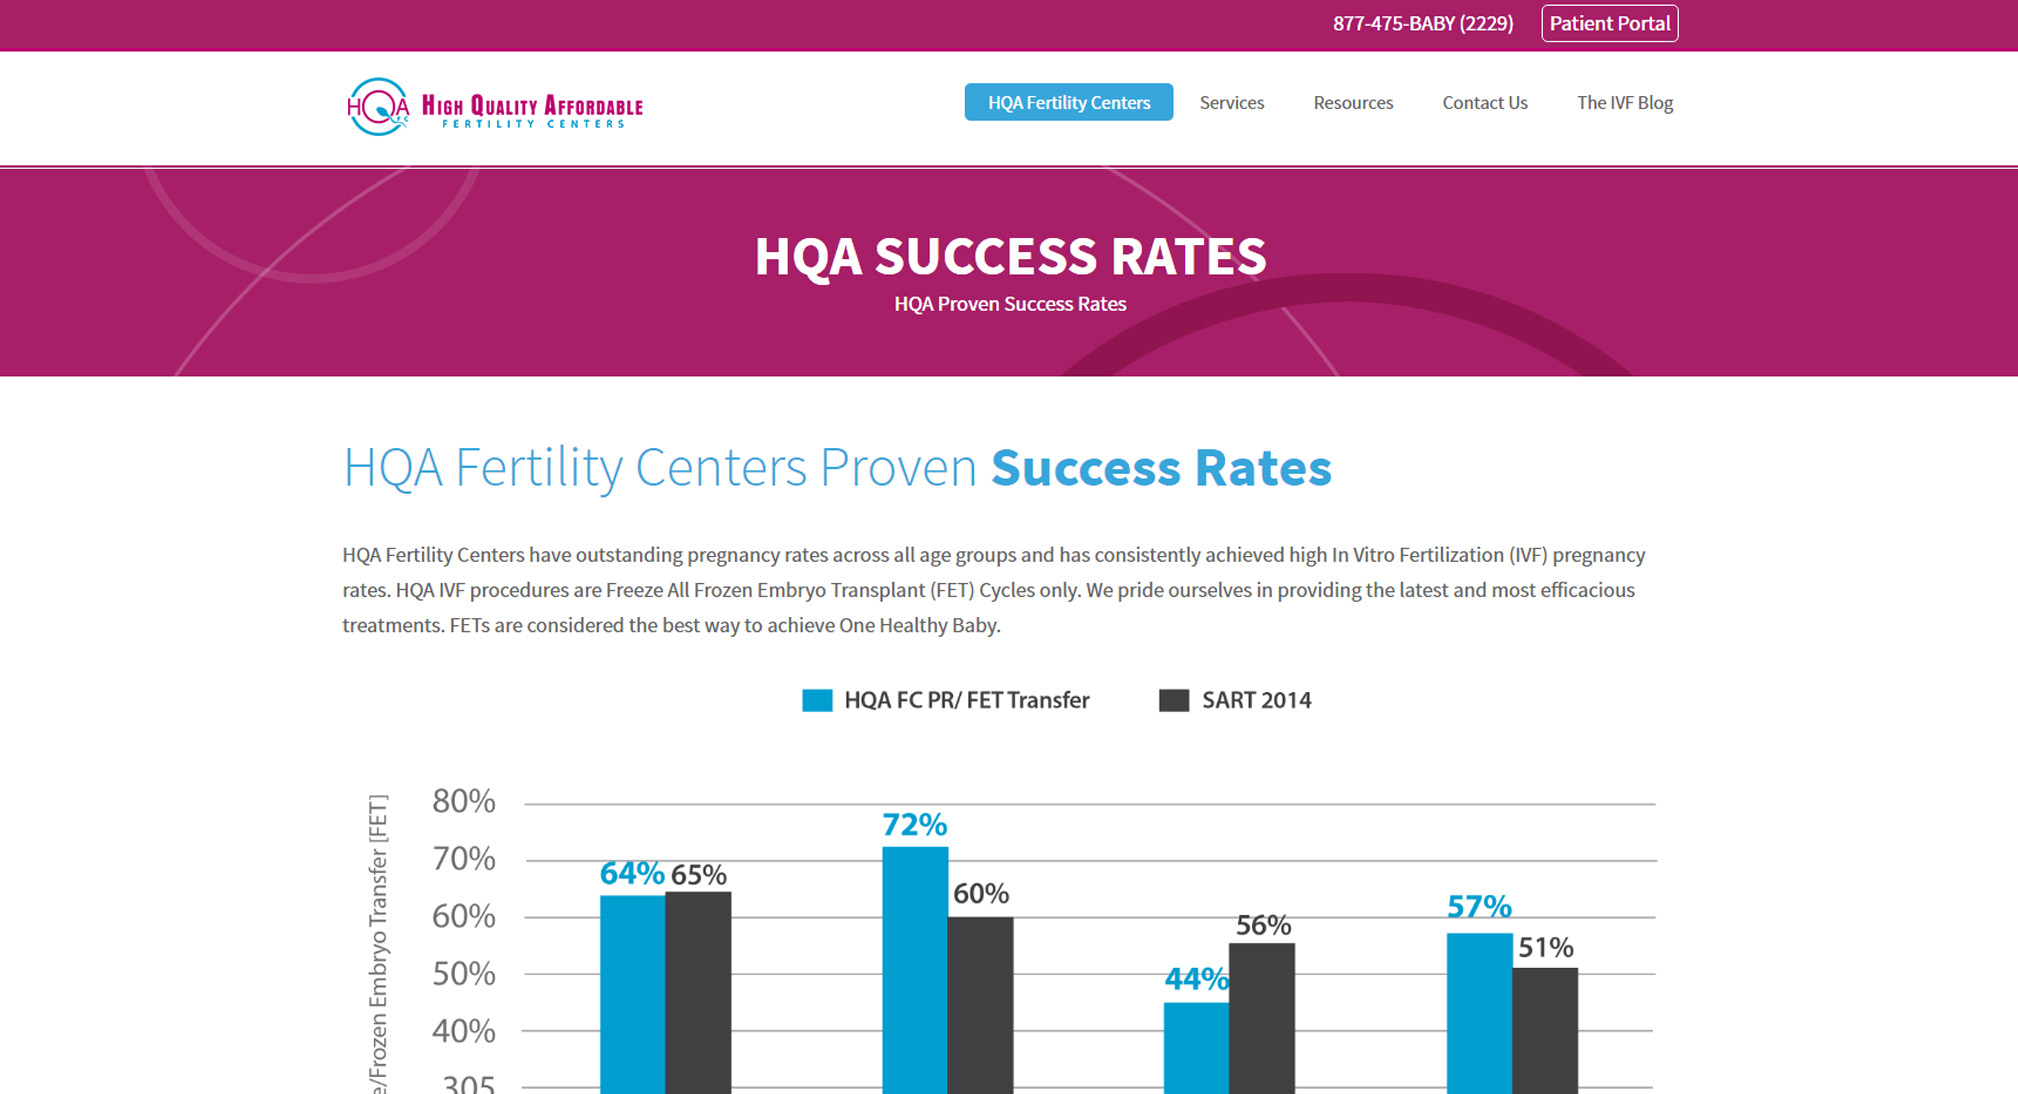 High Quality Affordable (HQA) Fertility Centers website design and development inner page and images